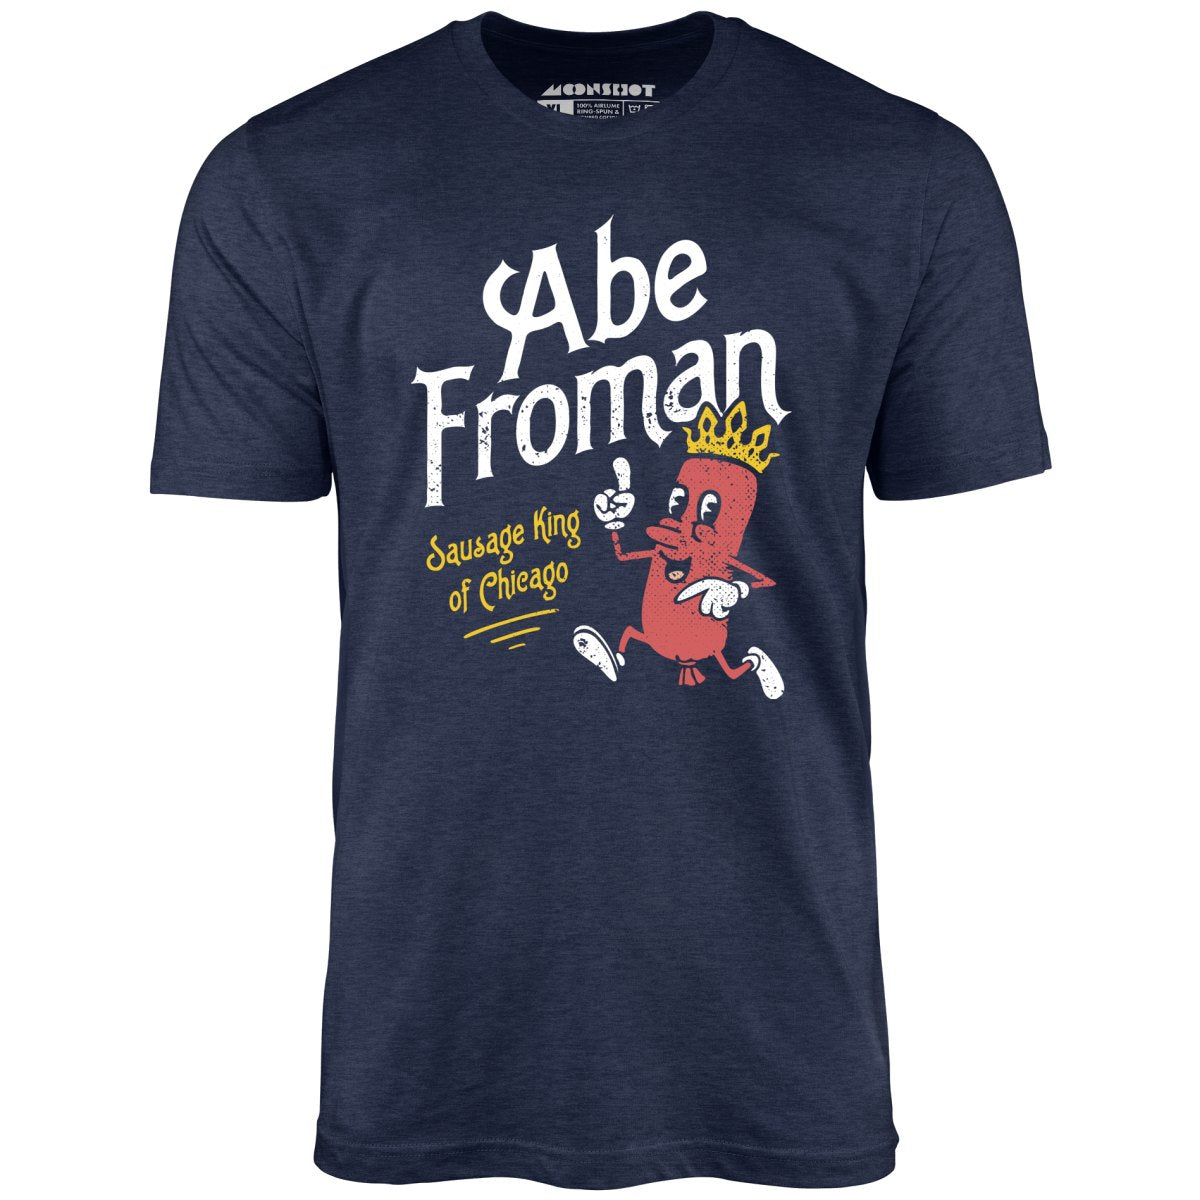 Abe Froman - Sausage King of Chicago - Unisex T-Shirt